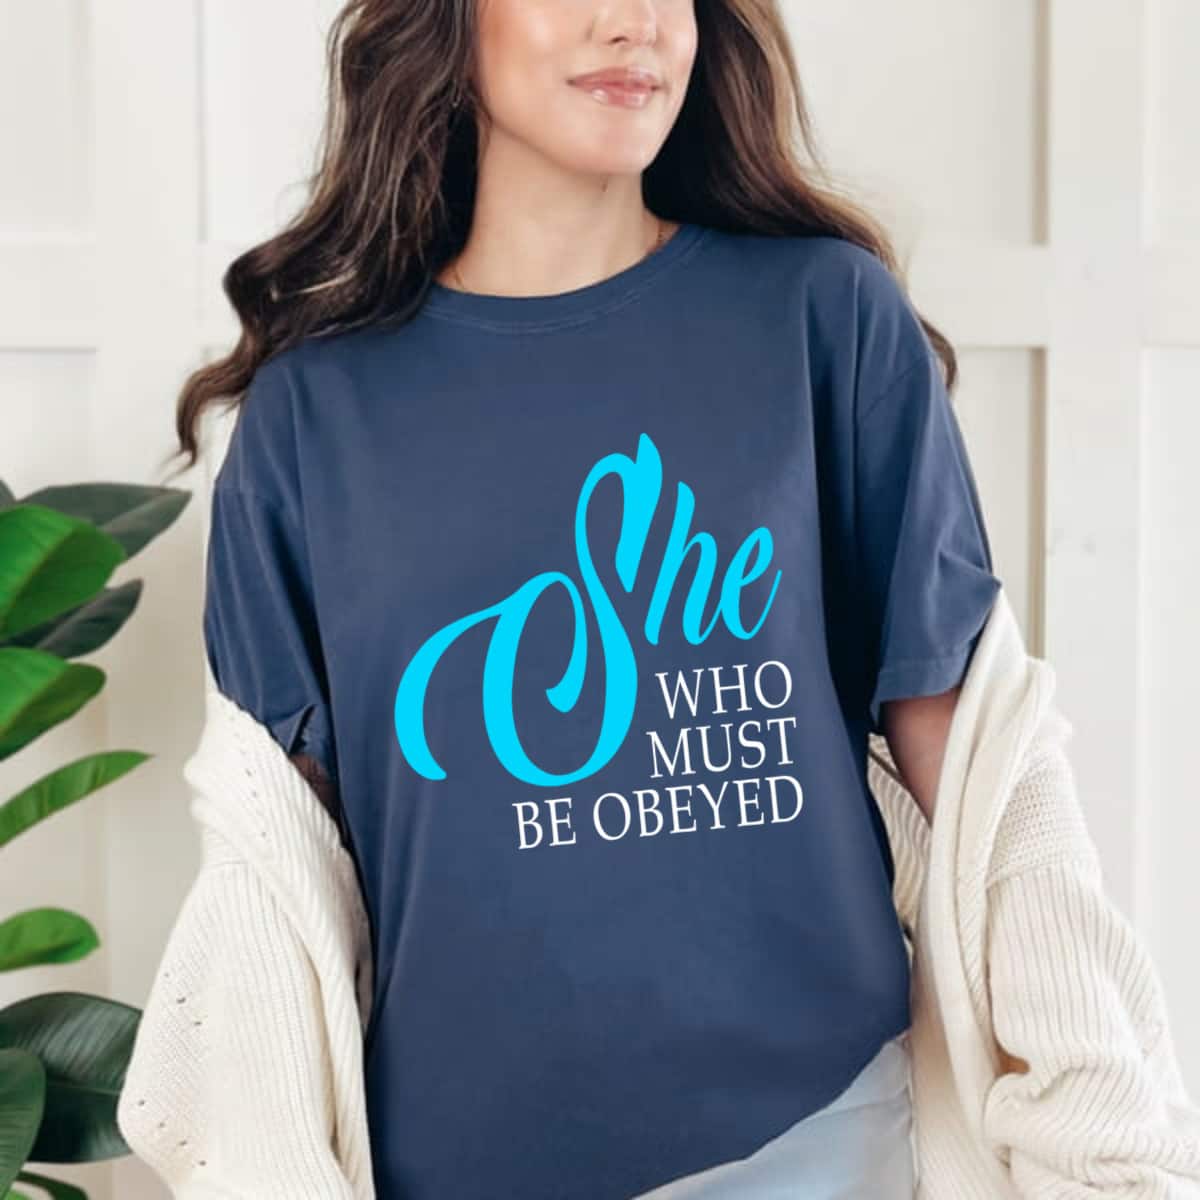 Womens She Who Must Be Obeyed Funny Sarcastic Feminist Humor T-Shirt